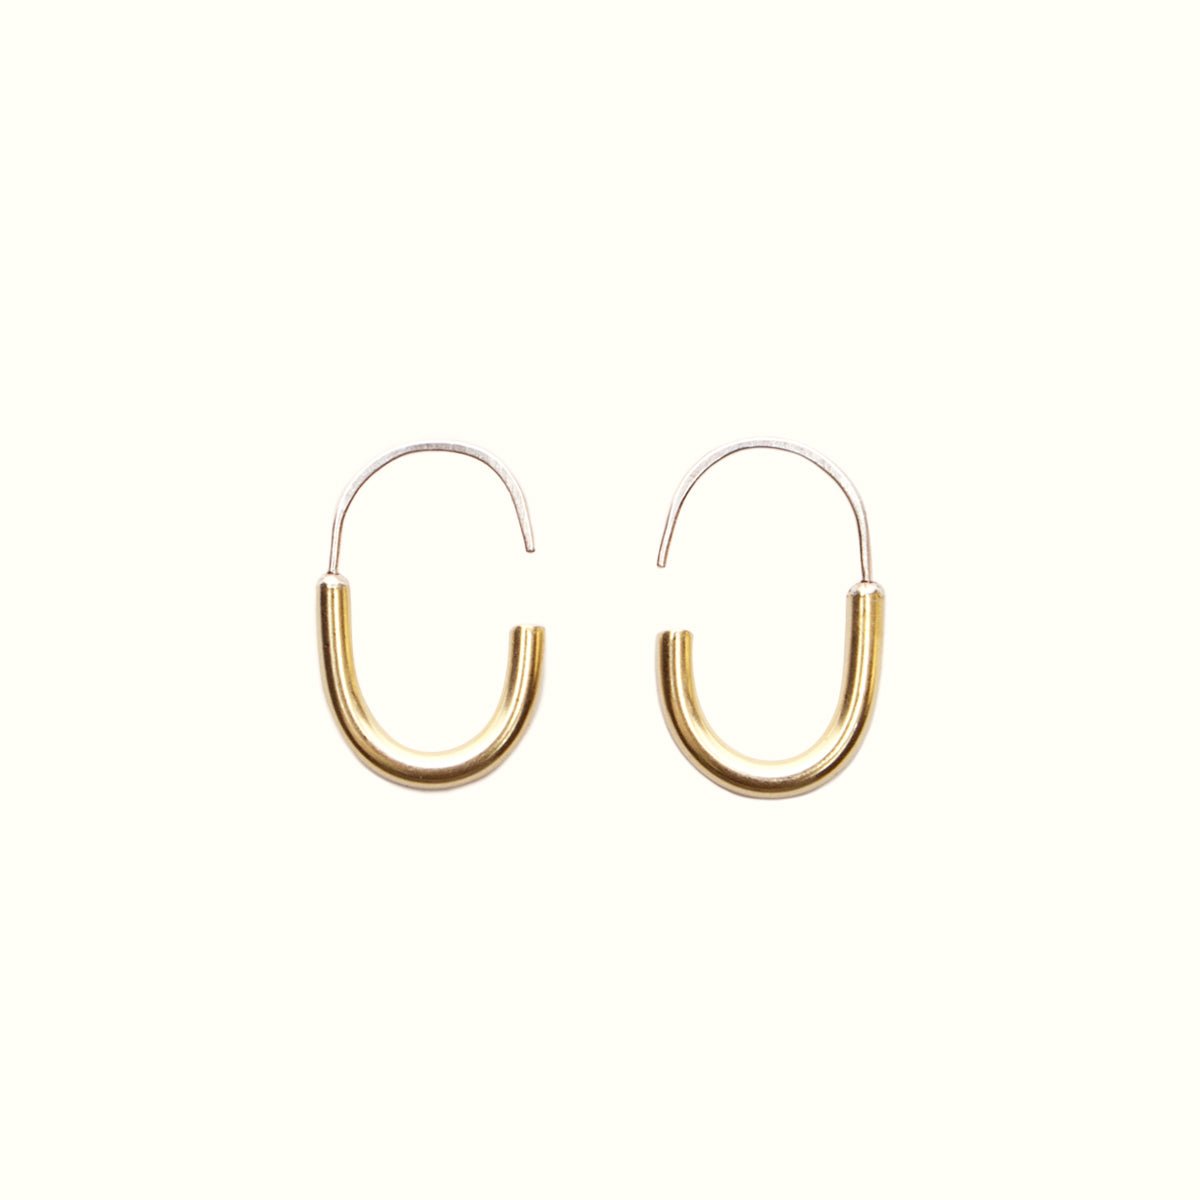 A mini brass hoop U-shaped earring with an arched sterling silver ear wire with a slight opening. Designed and handcrafted in Portland, Oregon.